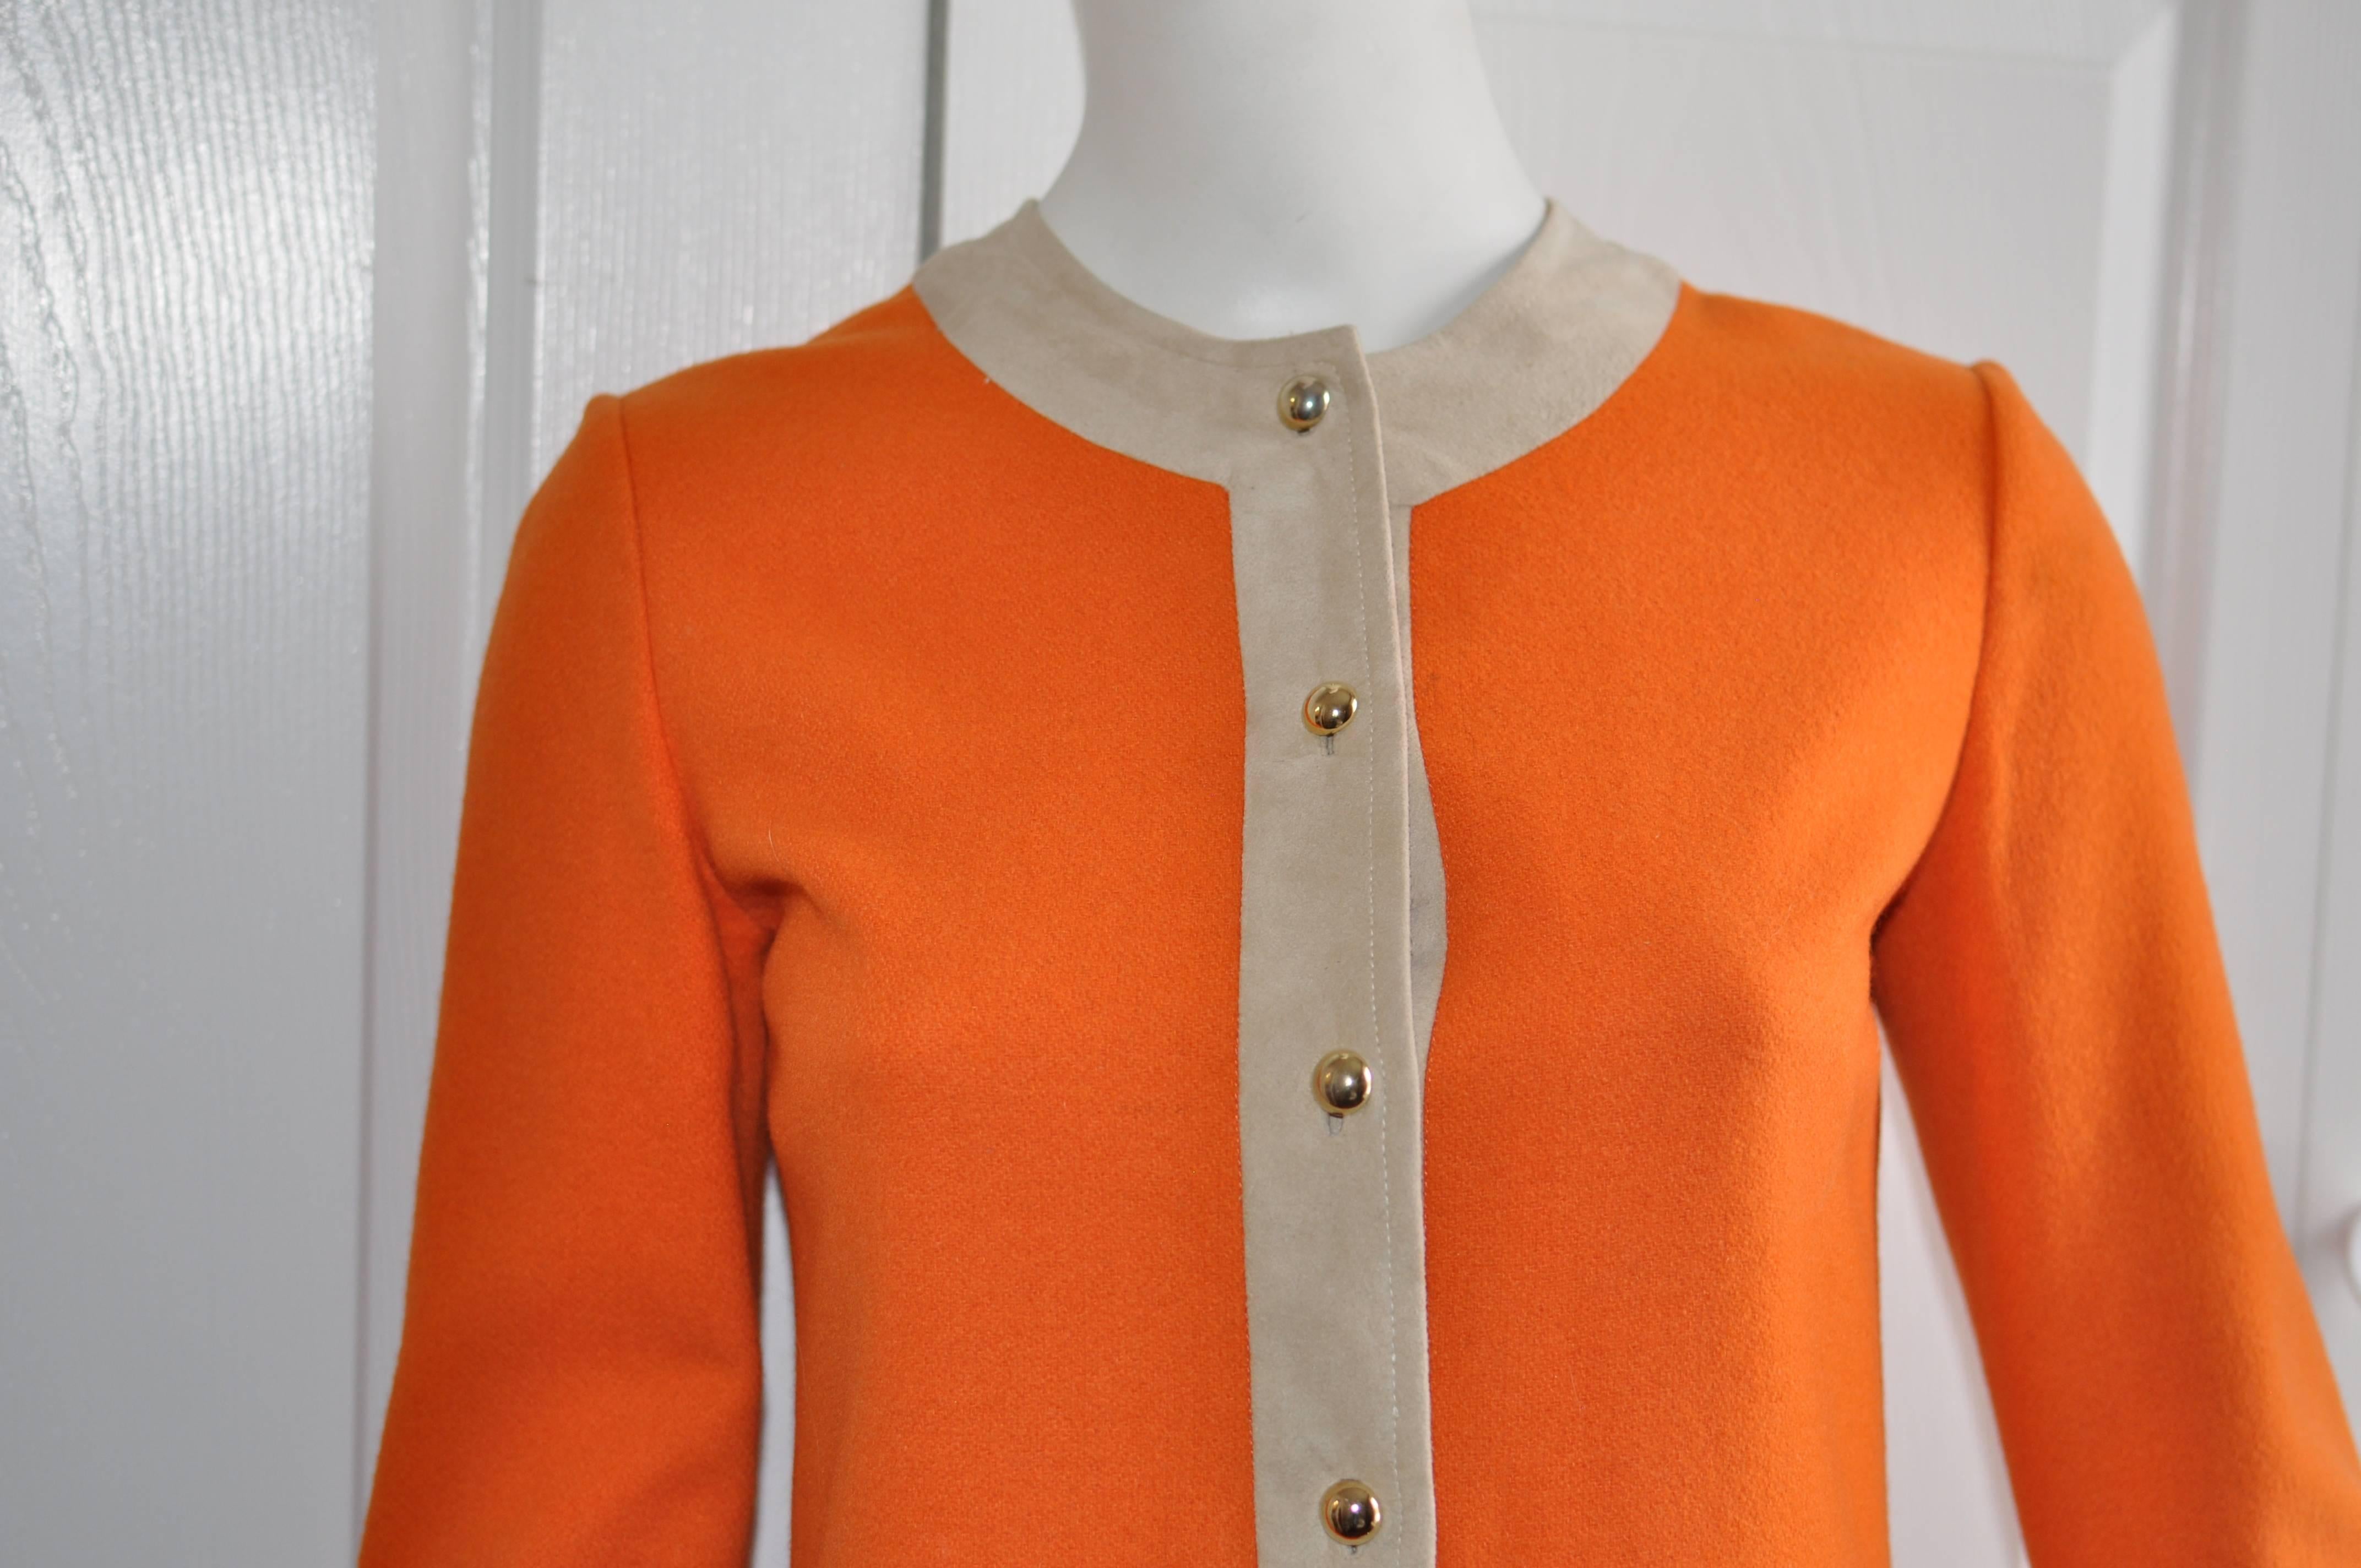 This wool shift coat/dress was carried by Eaton's Chelsea Place Room and was designed and manufactured in France, Although there is no designer label, it is reminiscent of Cardin and Courreges.

The  burnt orange coat/dress is trimmed with beige